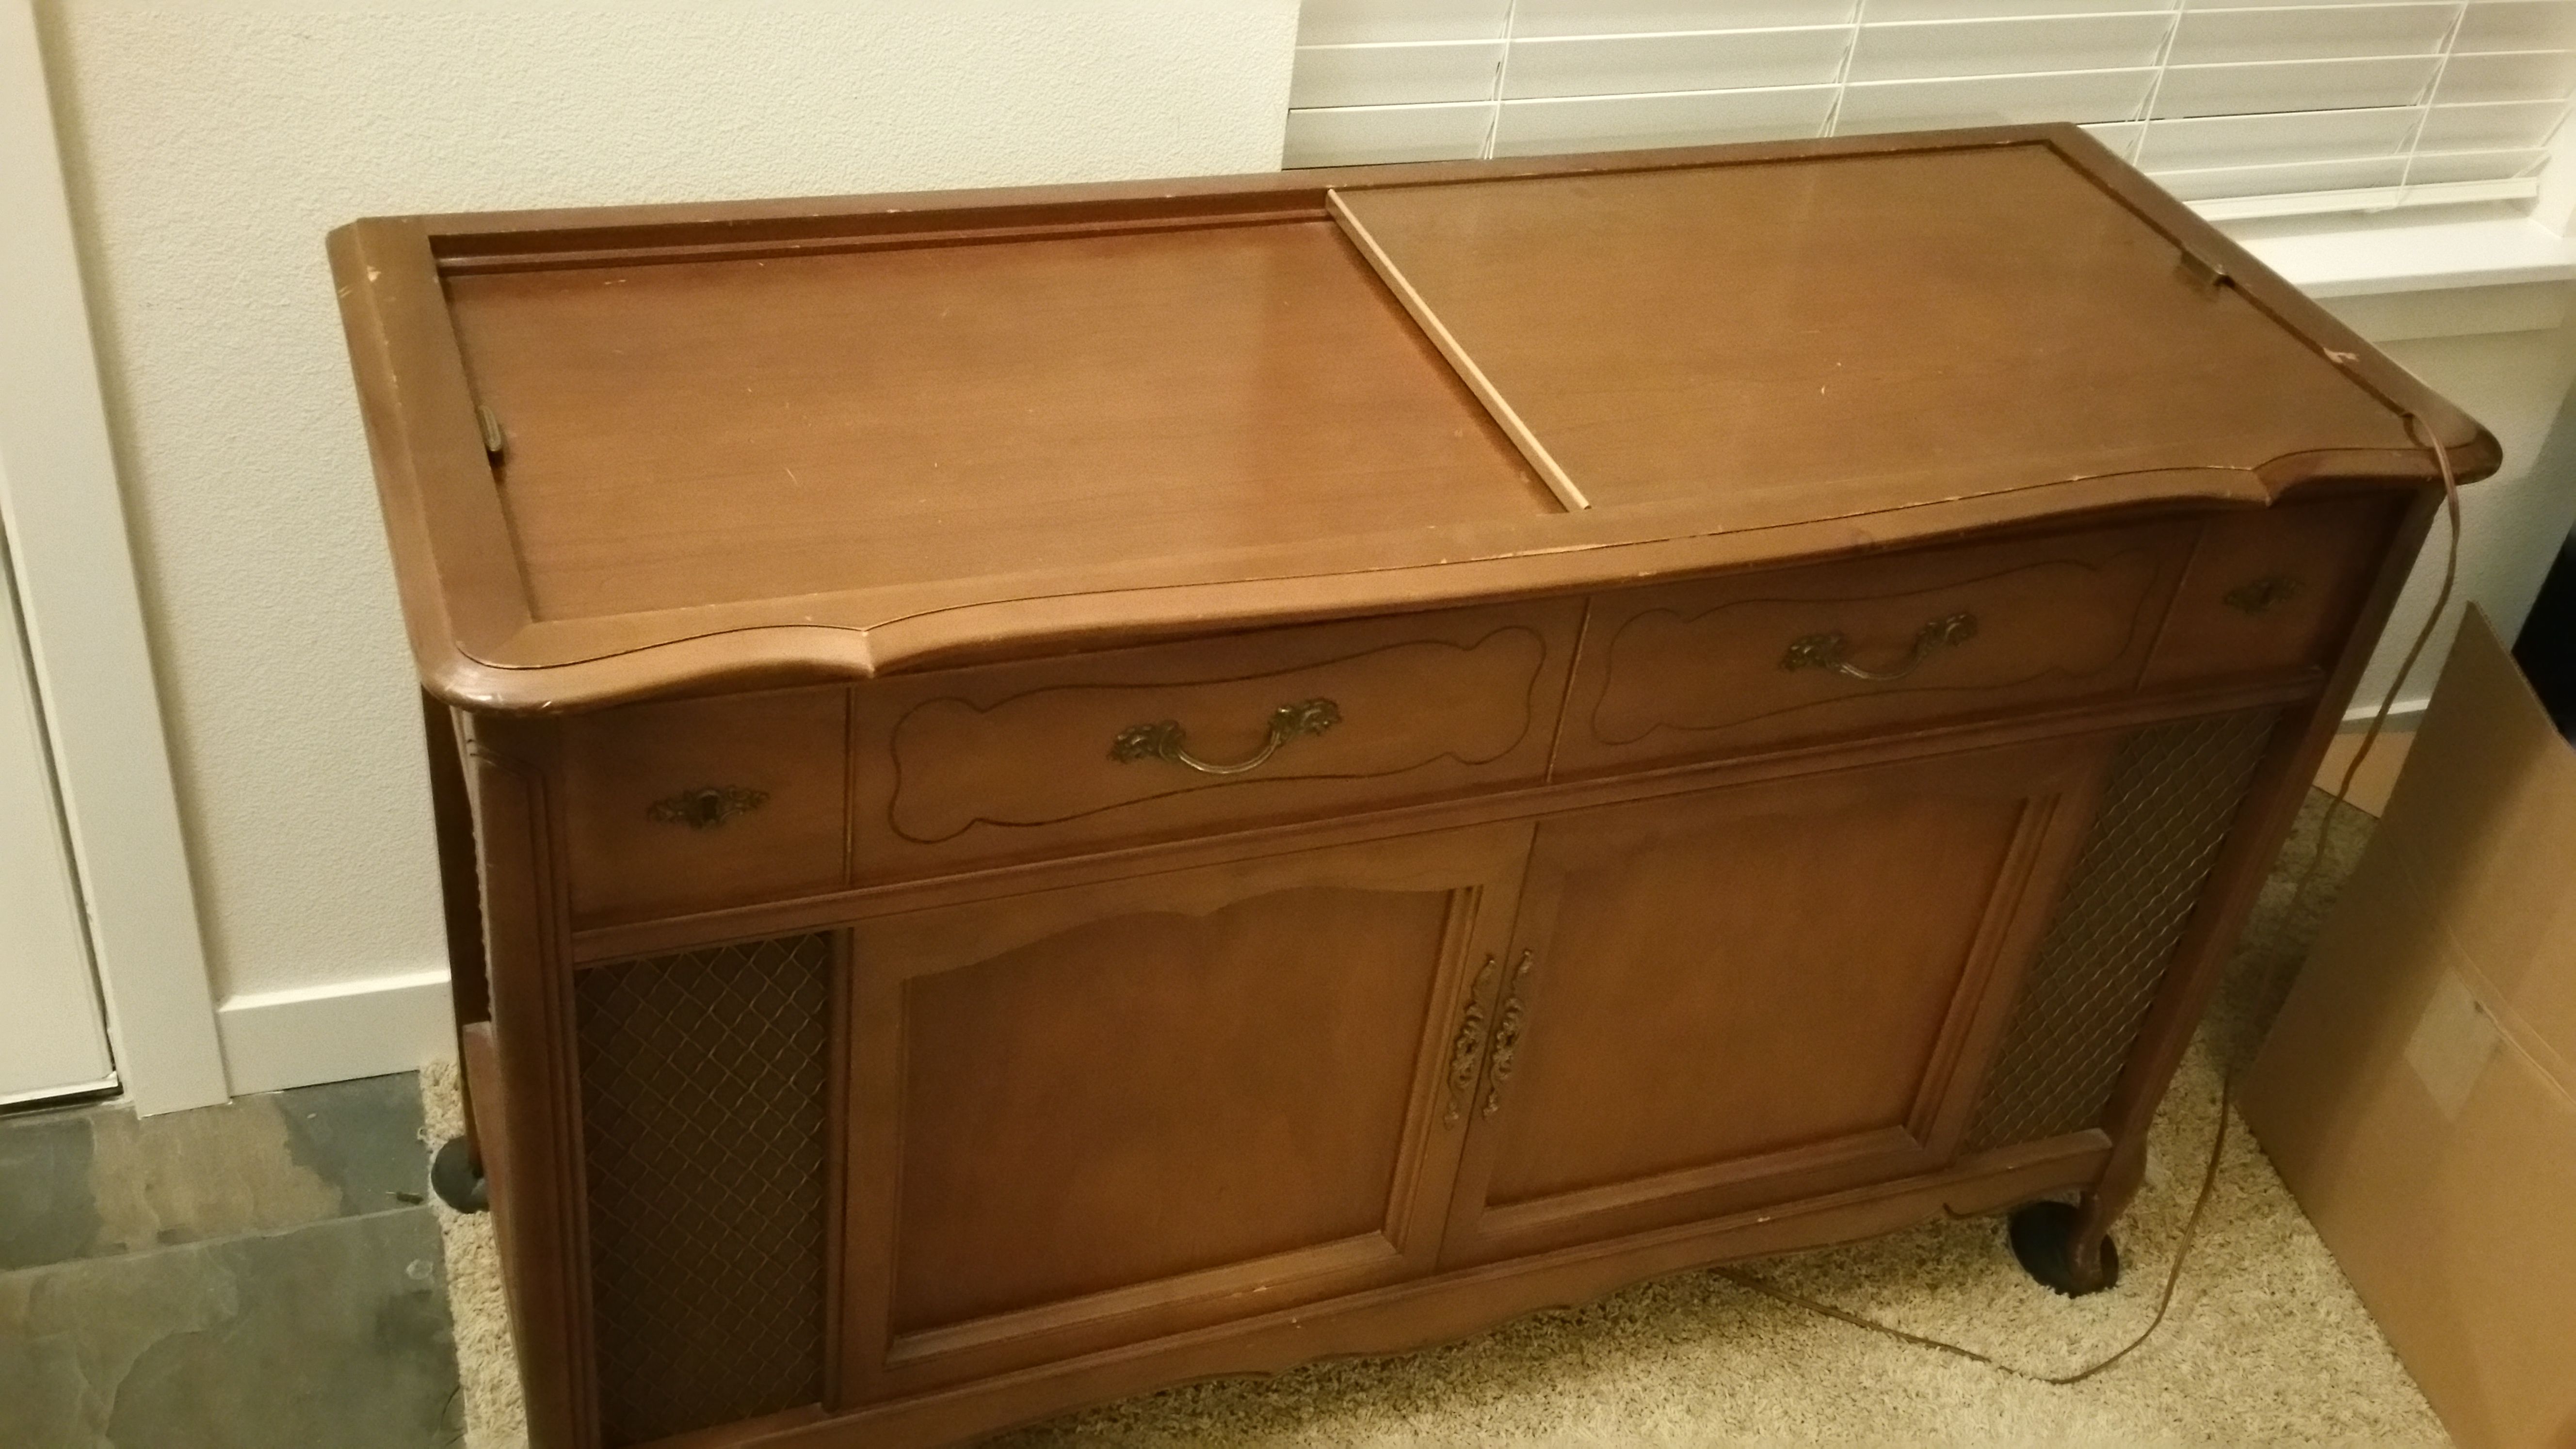 Media console, Magnavox stereophonic high fidelity